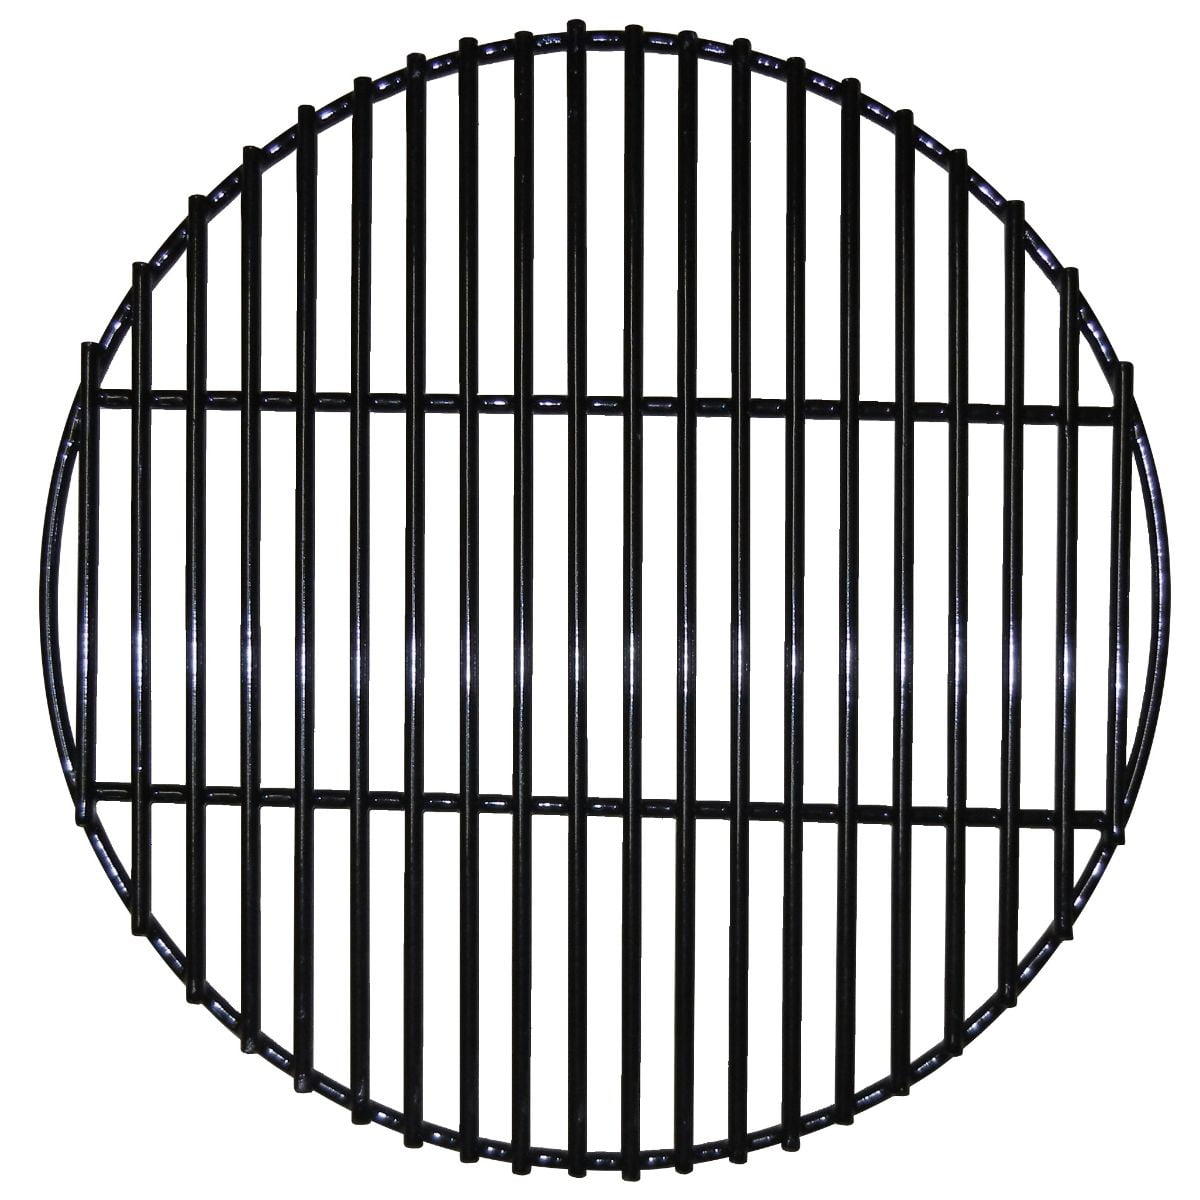 Porcelain steel wire rock grate for Chargriller brand gas grills